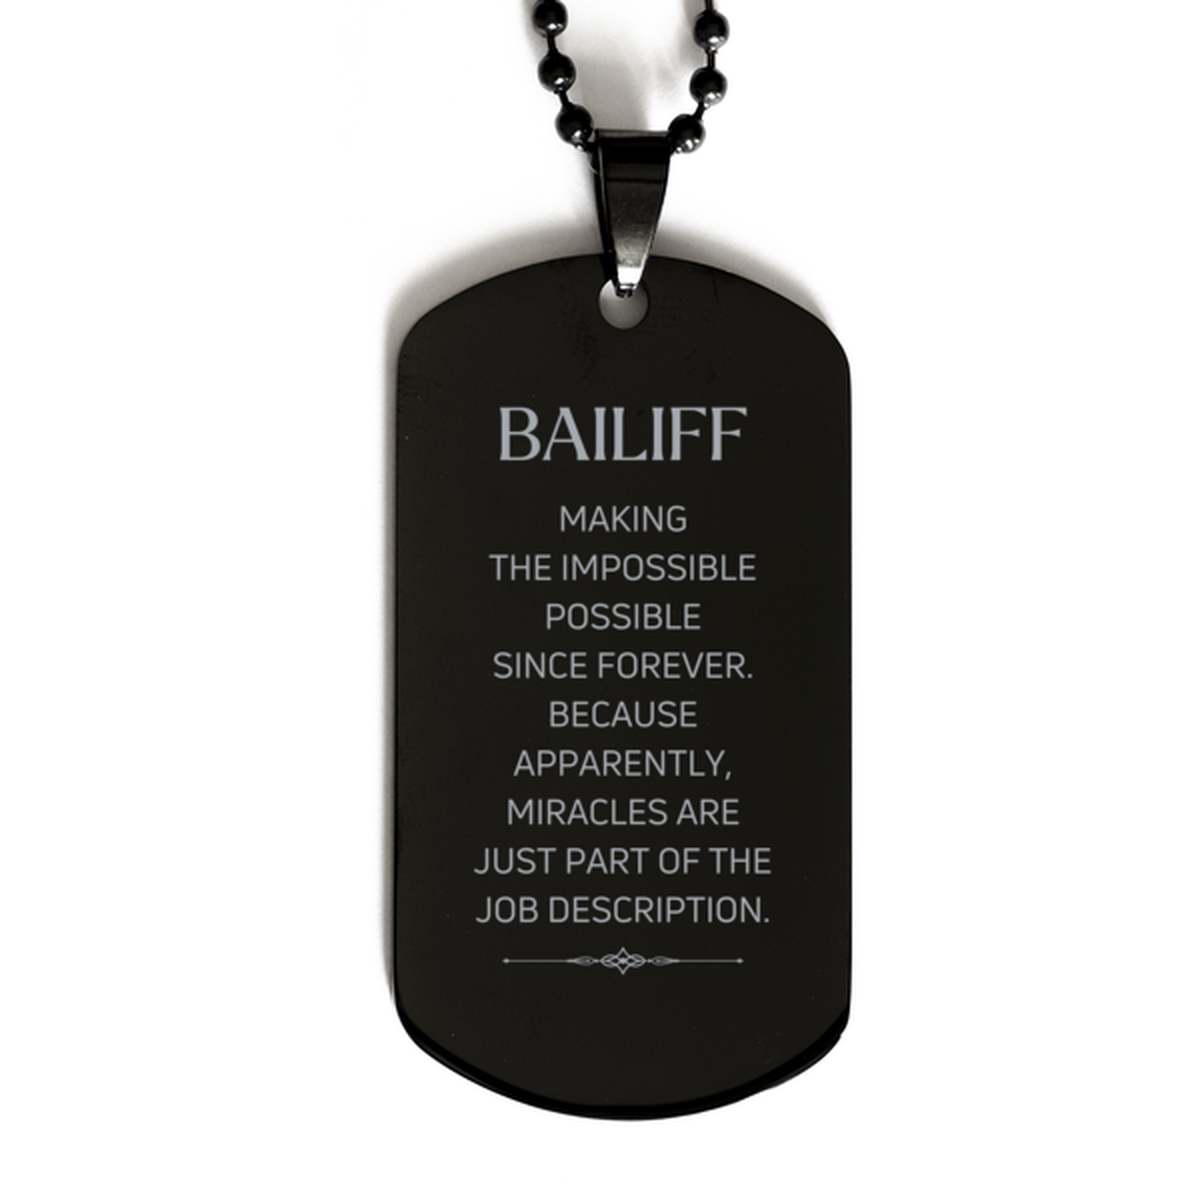 Funny Bailiff Gifts, Miracles are just part of the job description, Inspirational Birthday Black Dog Tag For Bailiff, Men, Women, Coworkers, Friends, Boss